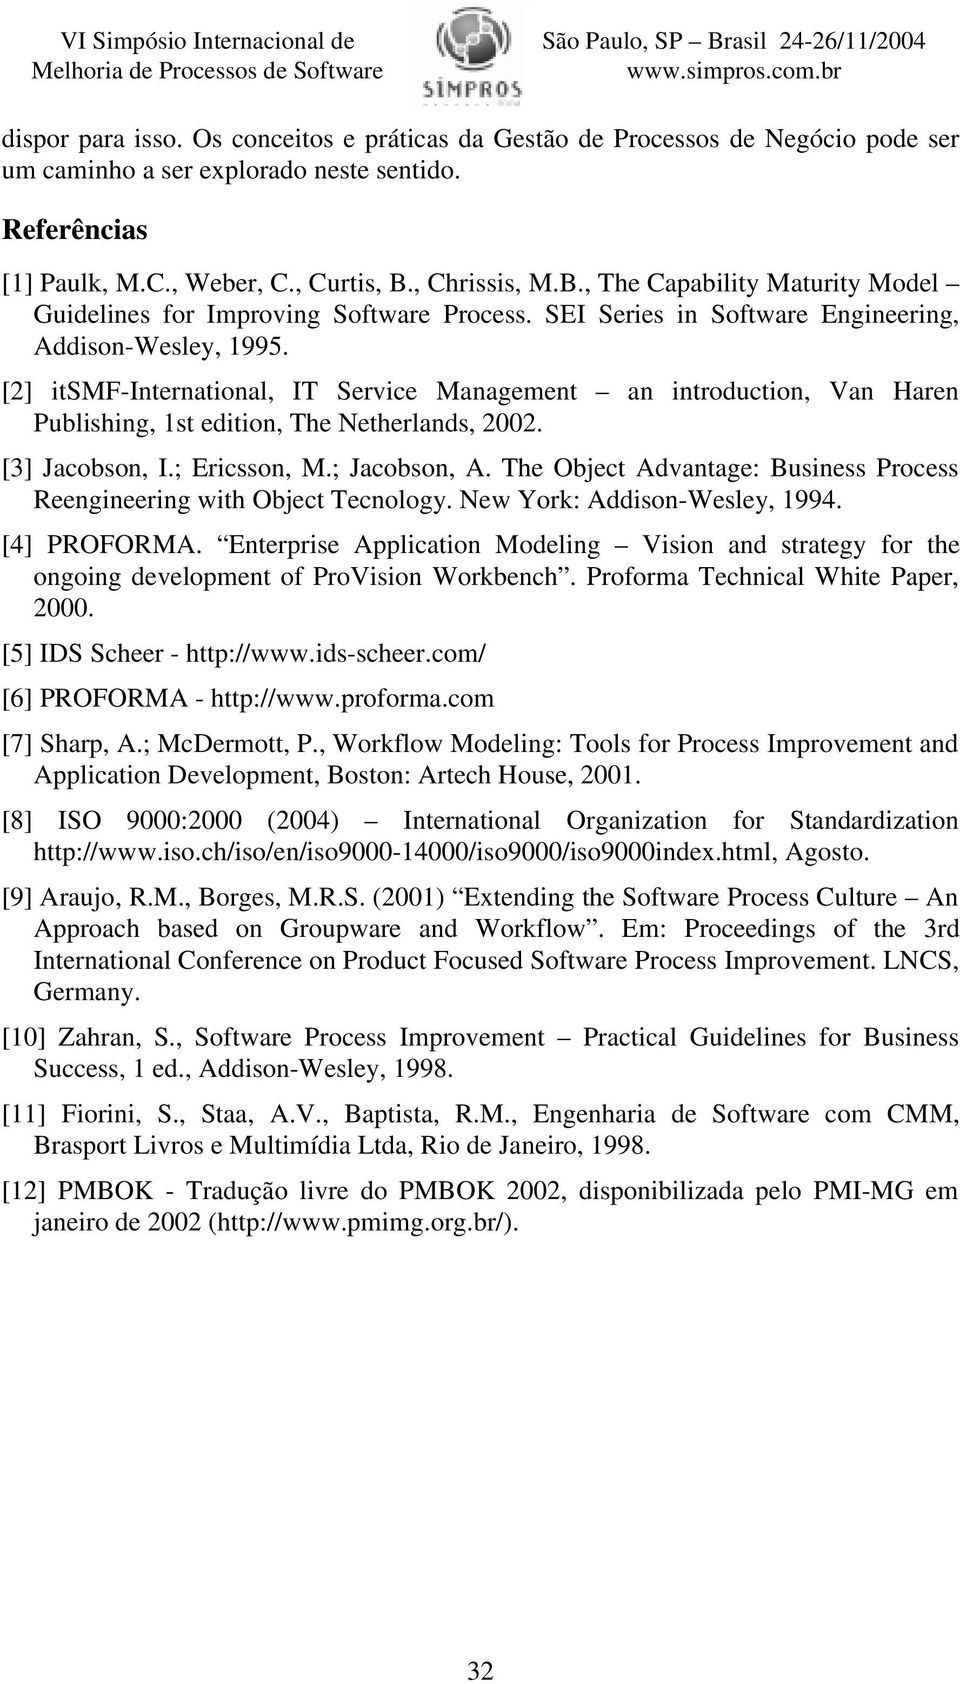 [2] itsmf-international, IT Service Management an introduction, Van Haren Publishing, 1st edition, The Netherlands, 2002. [3] Jacobson, I.; Ericsson, M.; Jacobson, A.